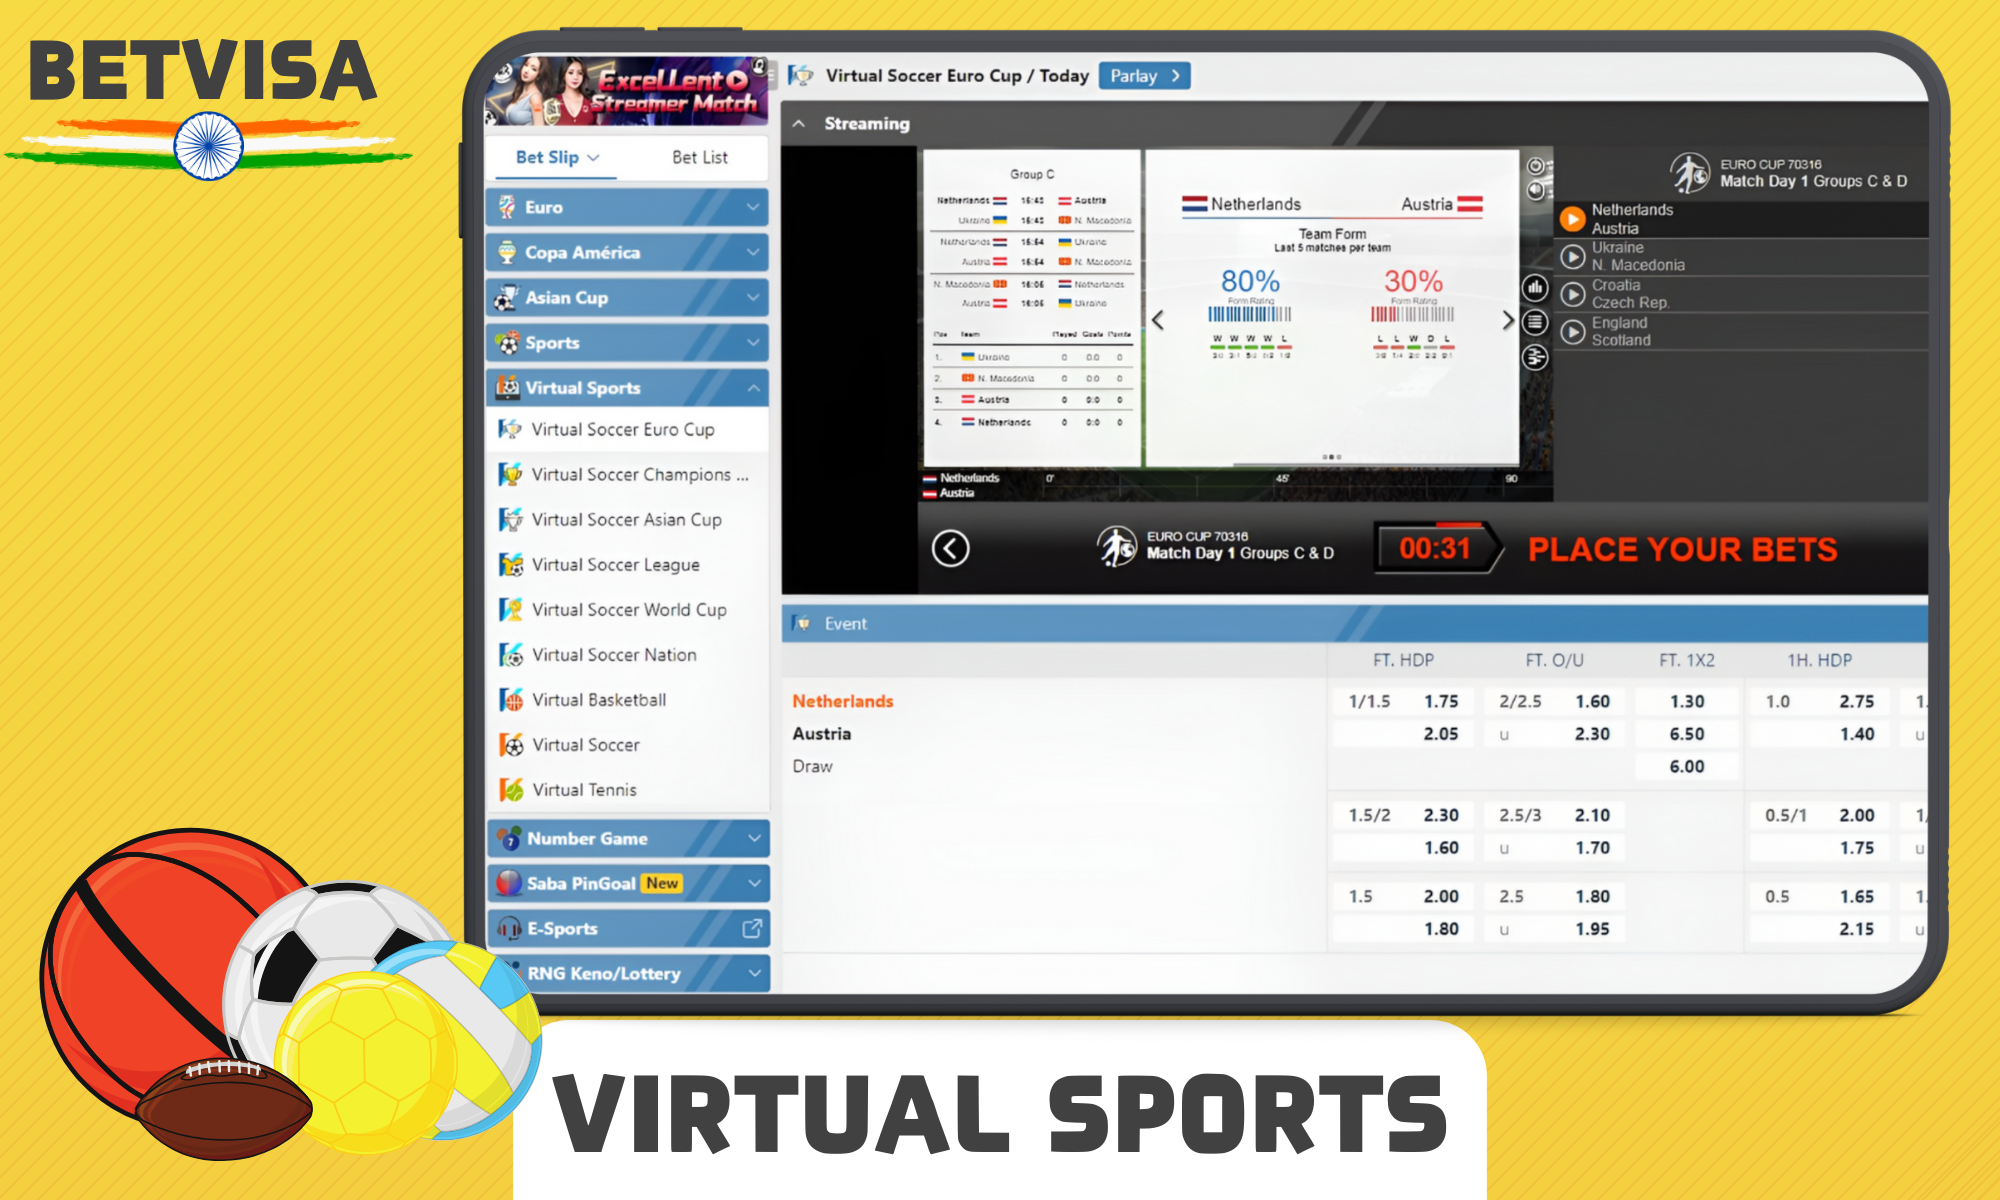 Virtual sports is a new trend in the sports betting industry that is available at Betvisa